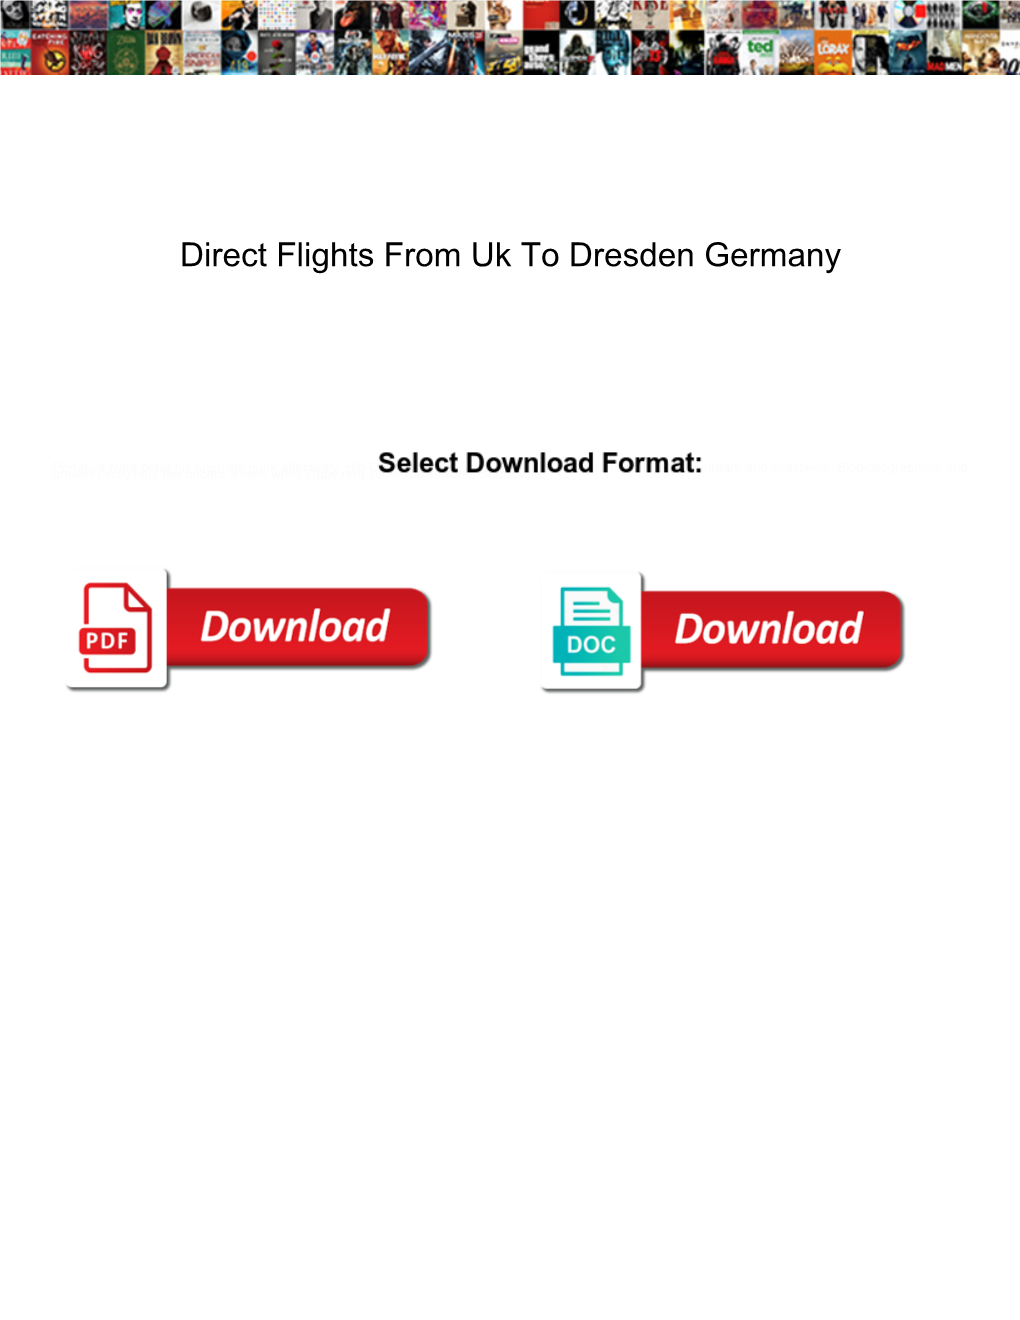 Direct Flights from Uk to Dresden Germany